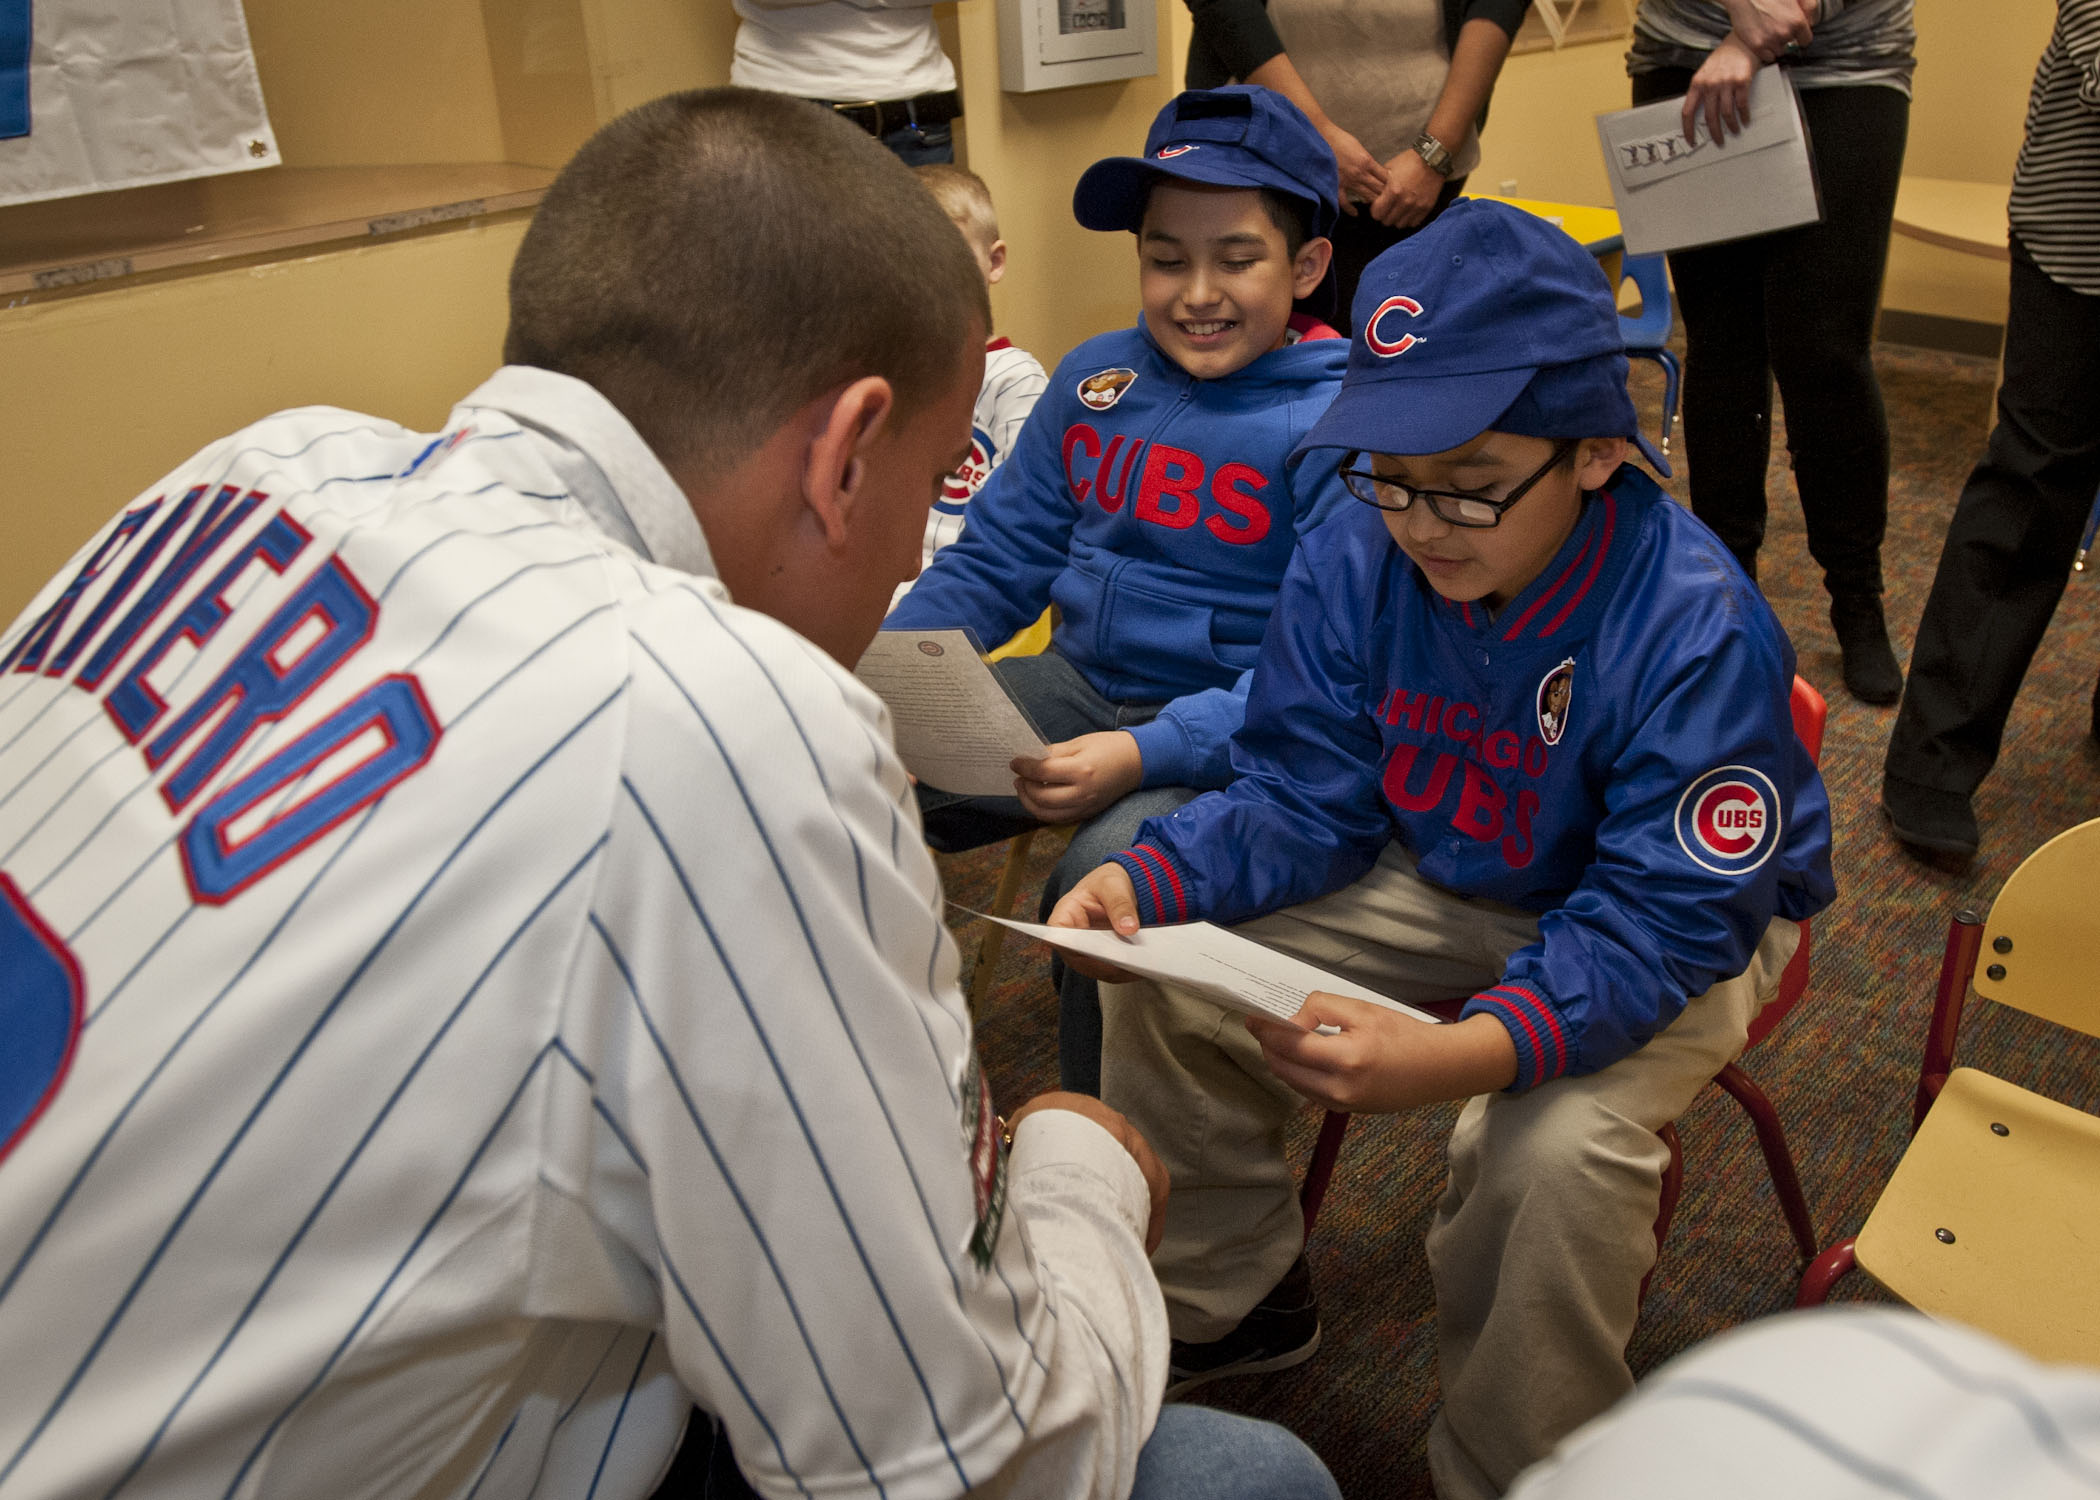 Kids had the opportunity to interview Cubs prospect Armando Rivero.